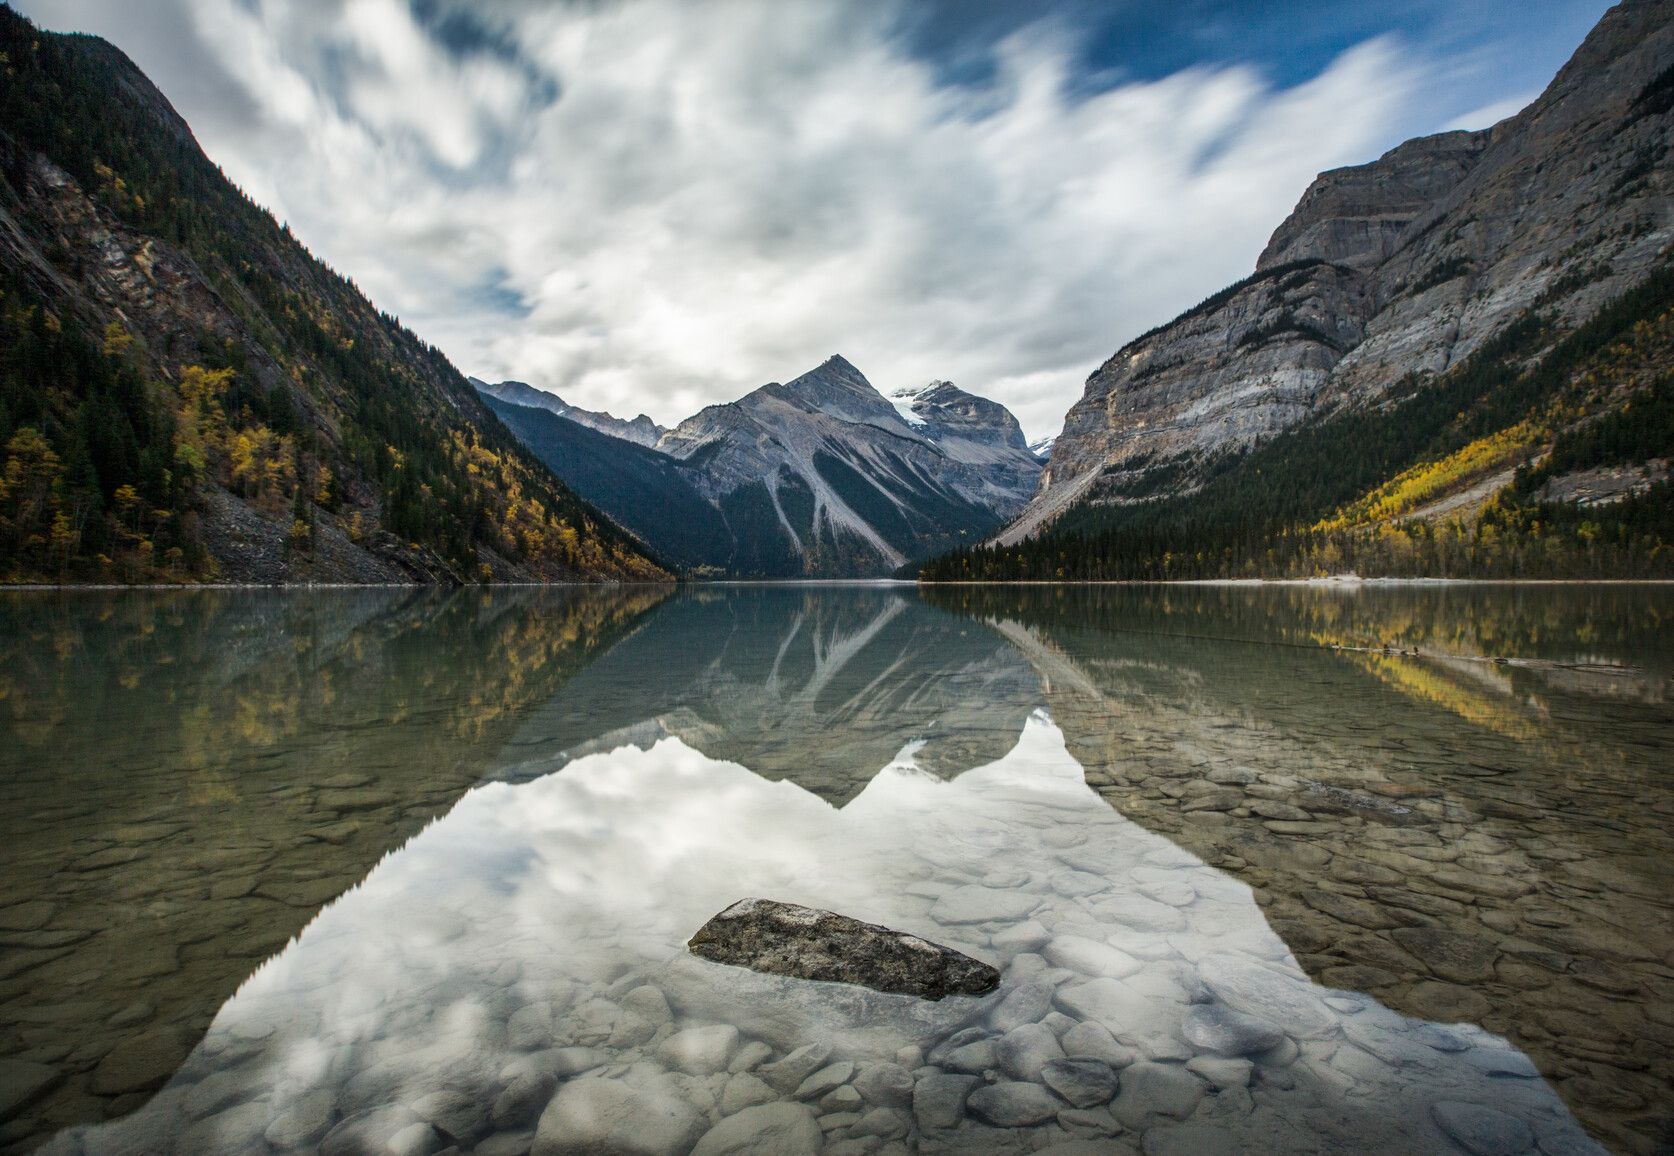 Kinney Lake in fall, with Mount Robson Park's majestic mountains, glaciers, and golden trees mirrored on its serene surface, showcasing nature's breathtaking beauty.